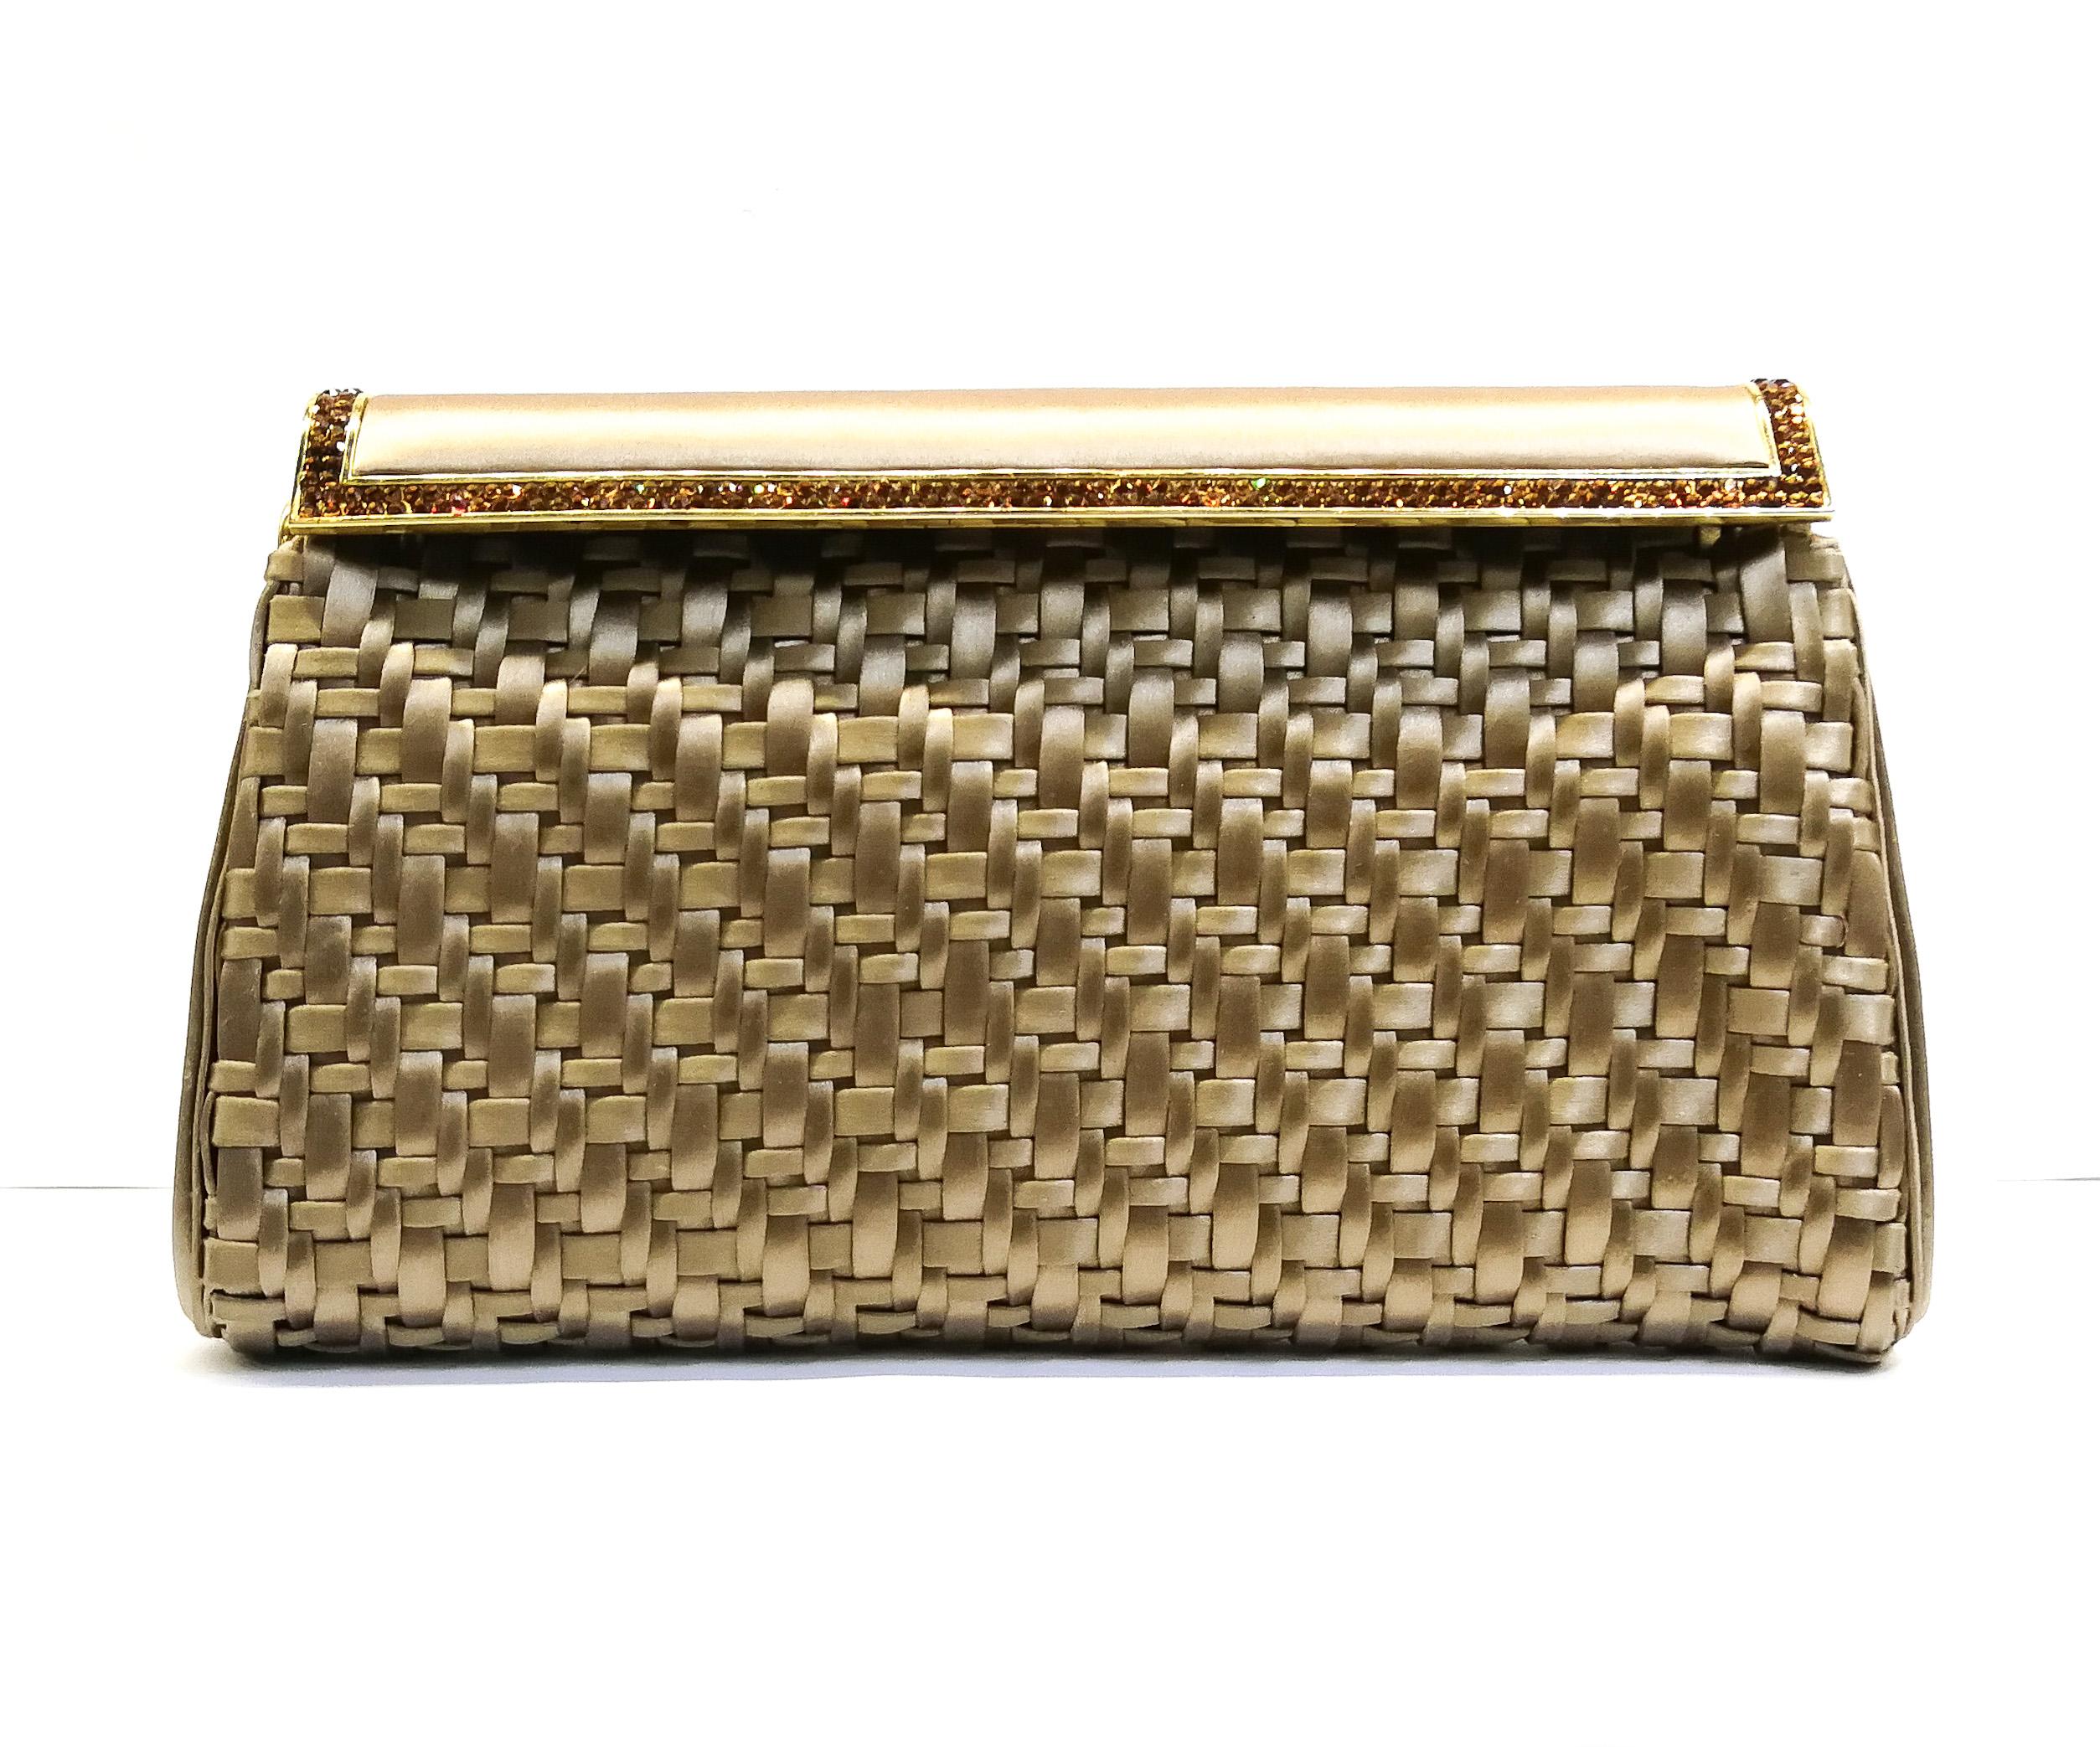 A very smart and elegant evening bag from Judith Leiber in the 1980s, made of 'woven/plaited' or 'latticed' bands of coffee coloured/soft bronze silk, set off against dark topaz rhinestones edging the gilt metal and silk sprung clasp/closure. It is